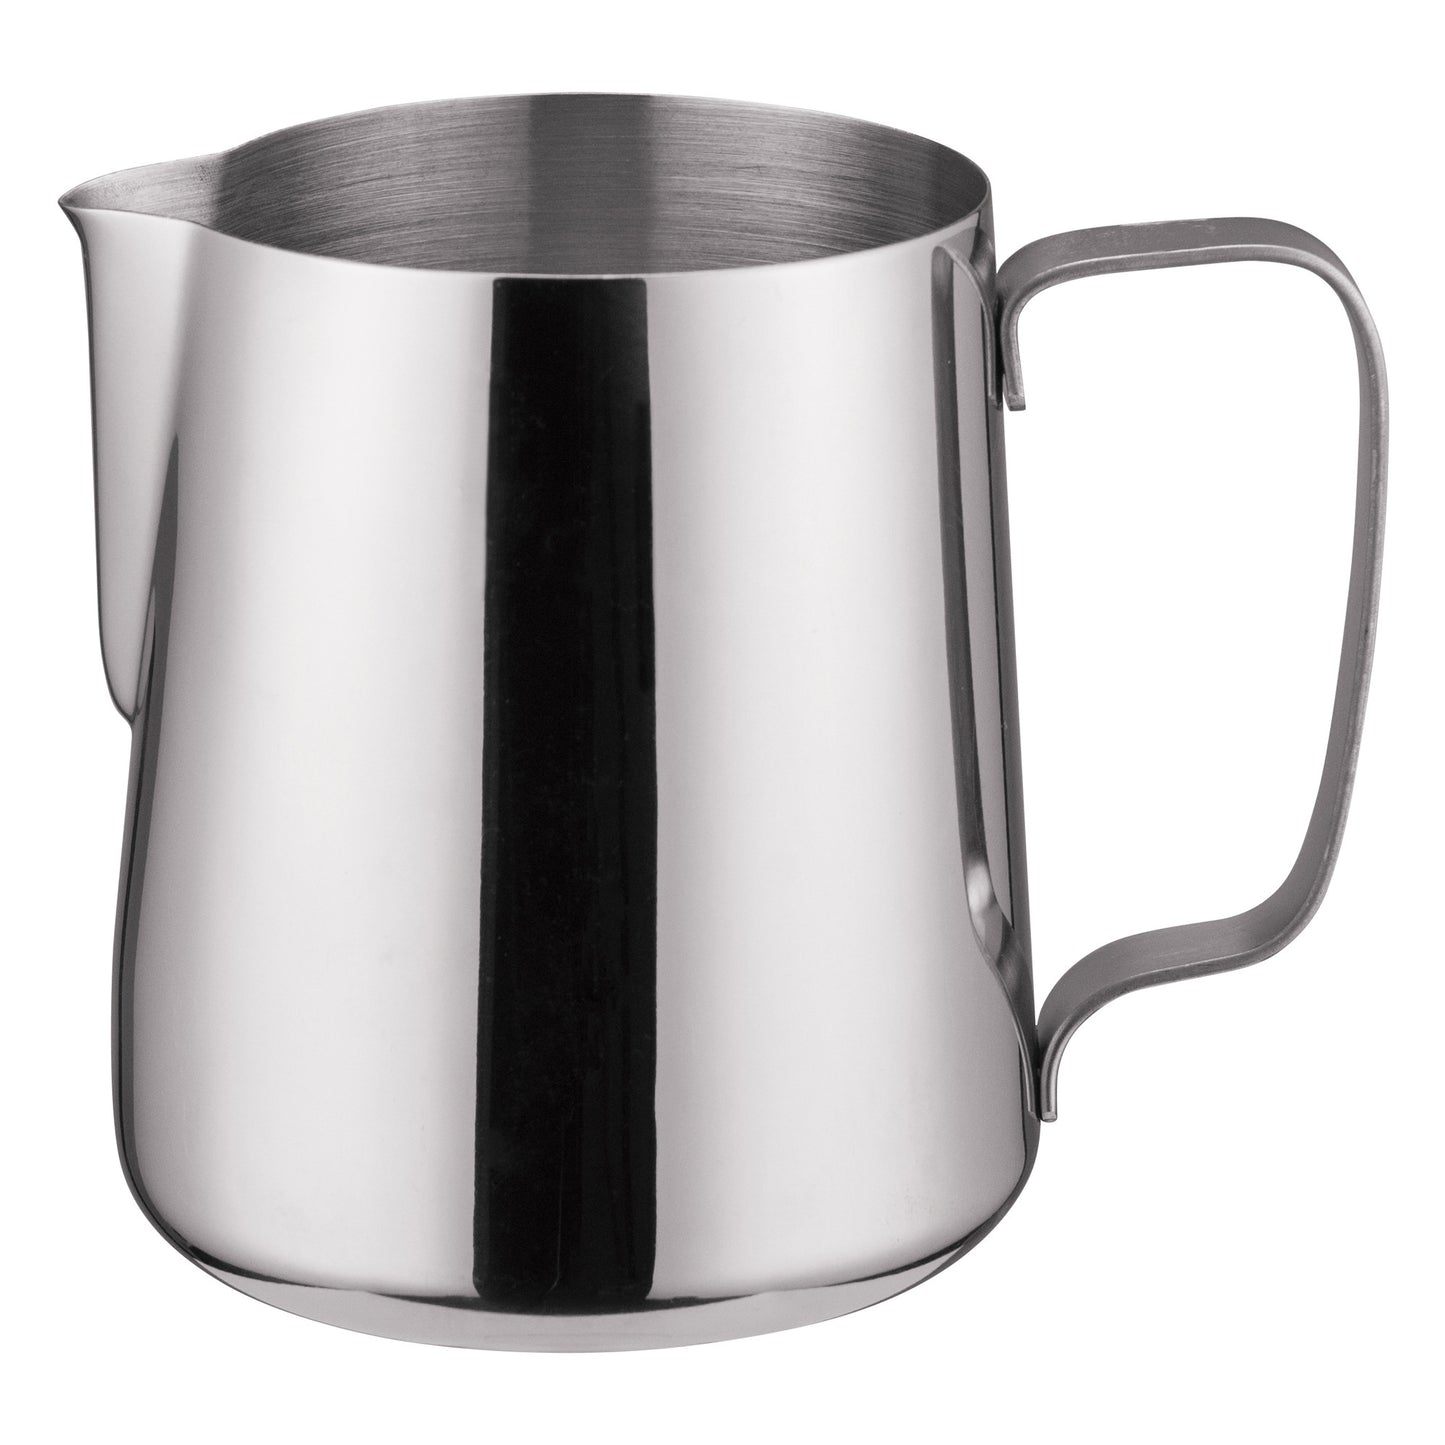 WP-33 - Frothing Pitcher, Stainless Steel - 33 oz